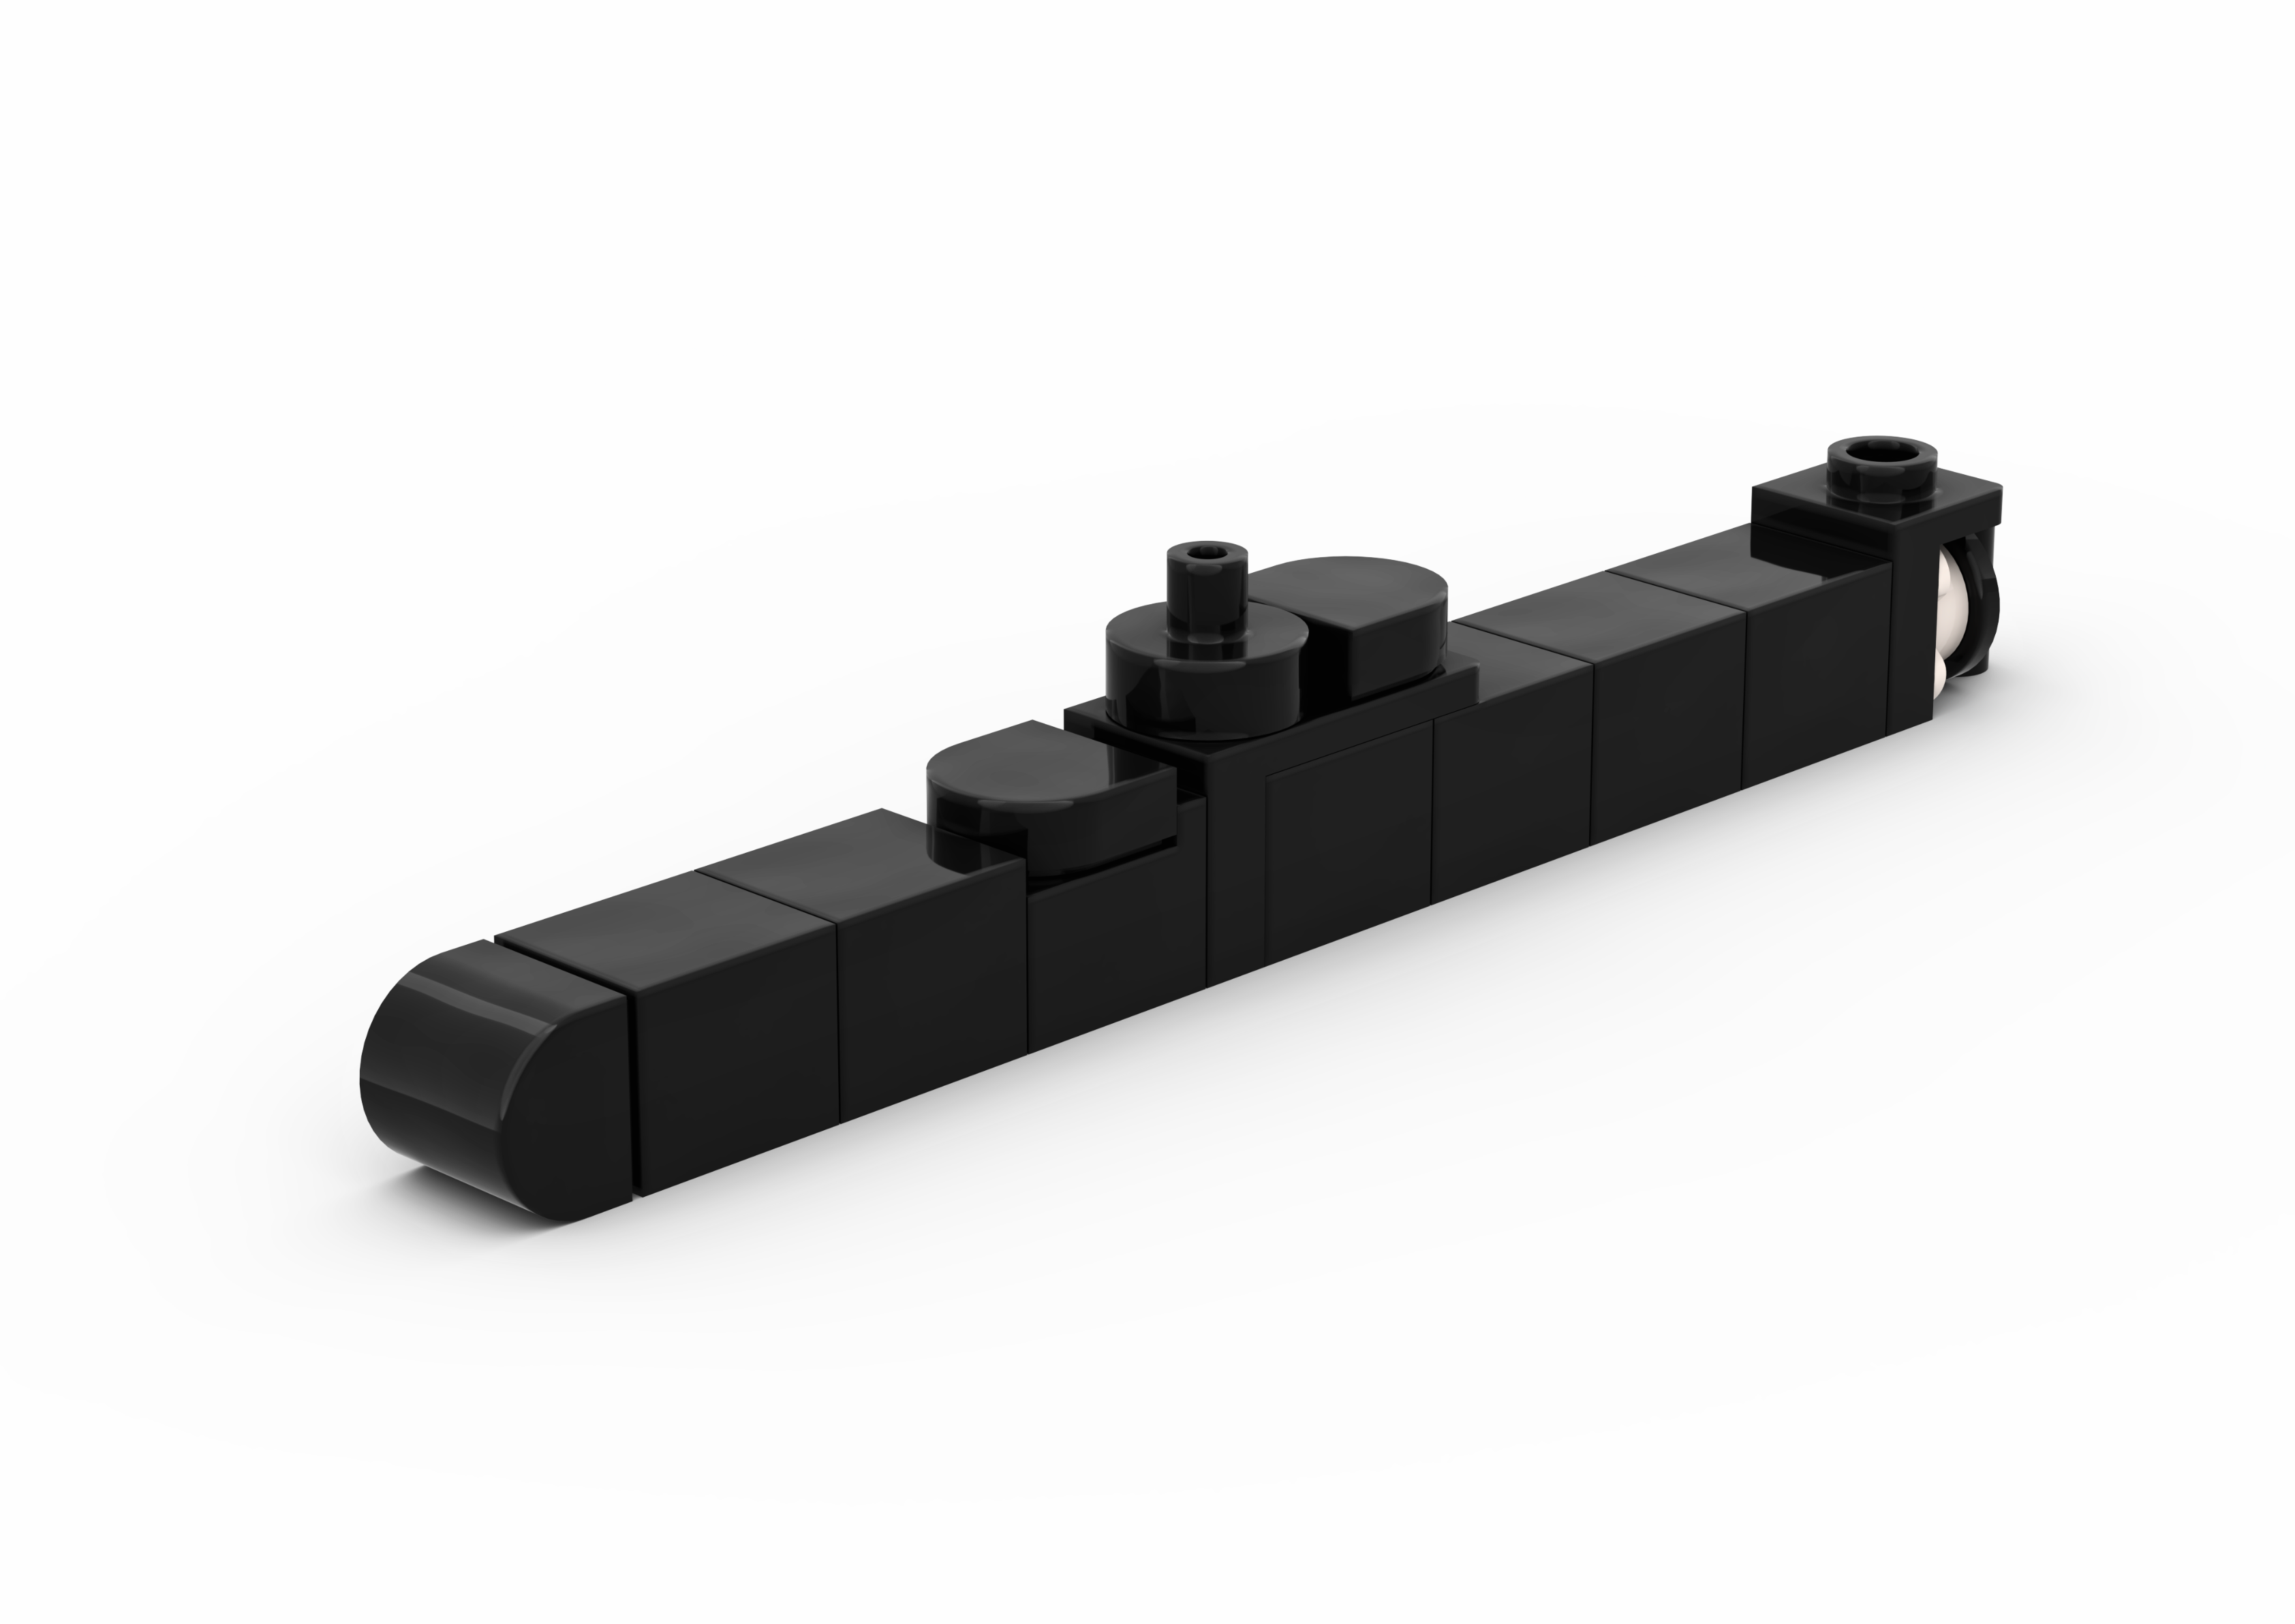 3D rendered image of the LEGO Micro Nuclear Submarine MOC.